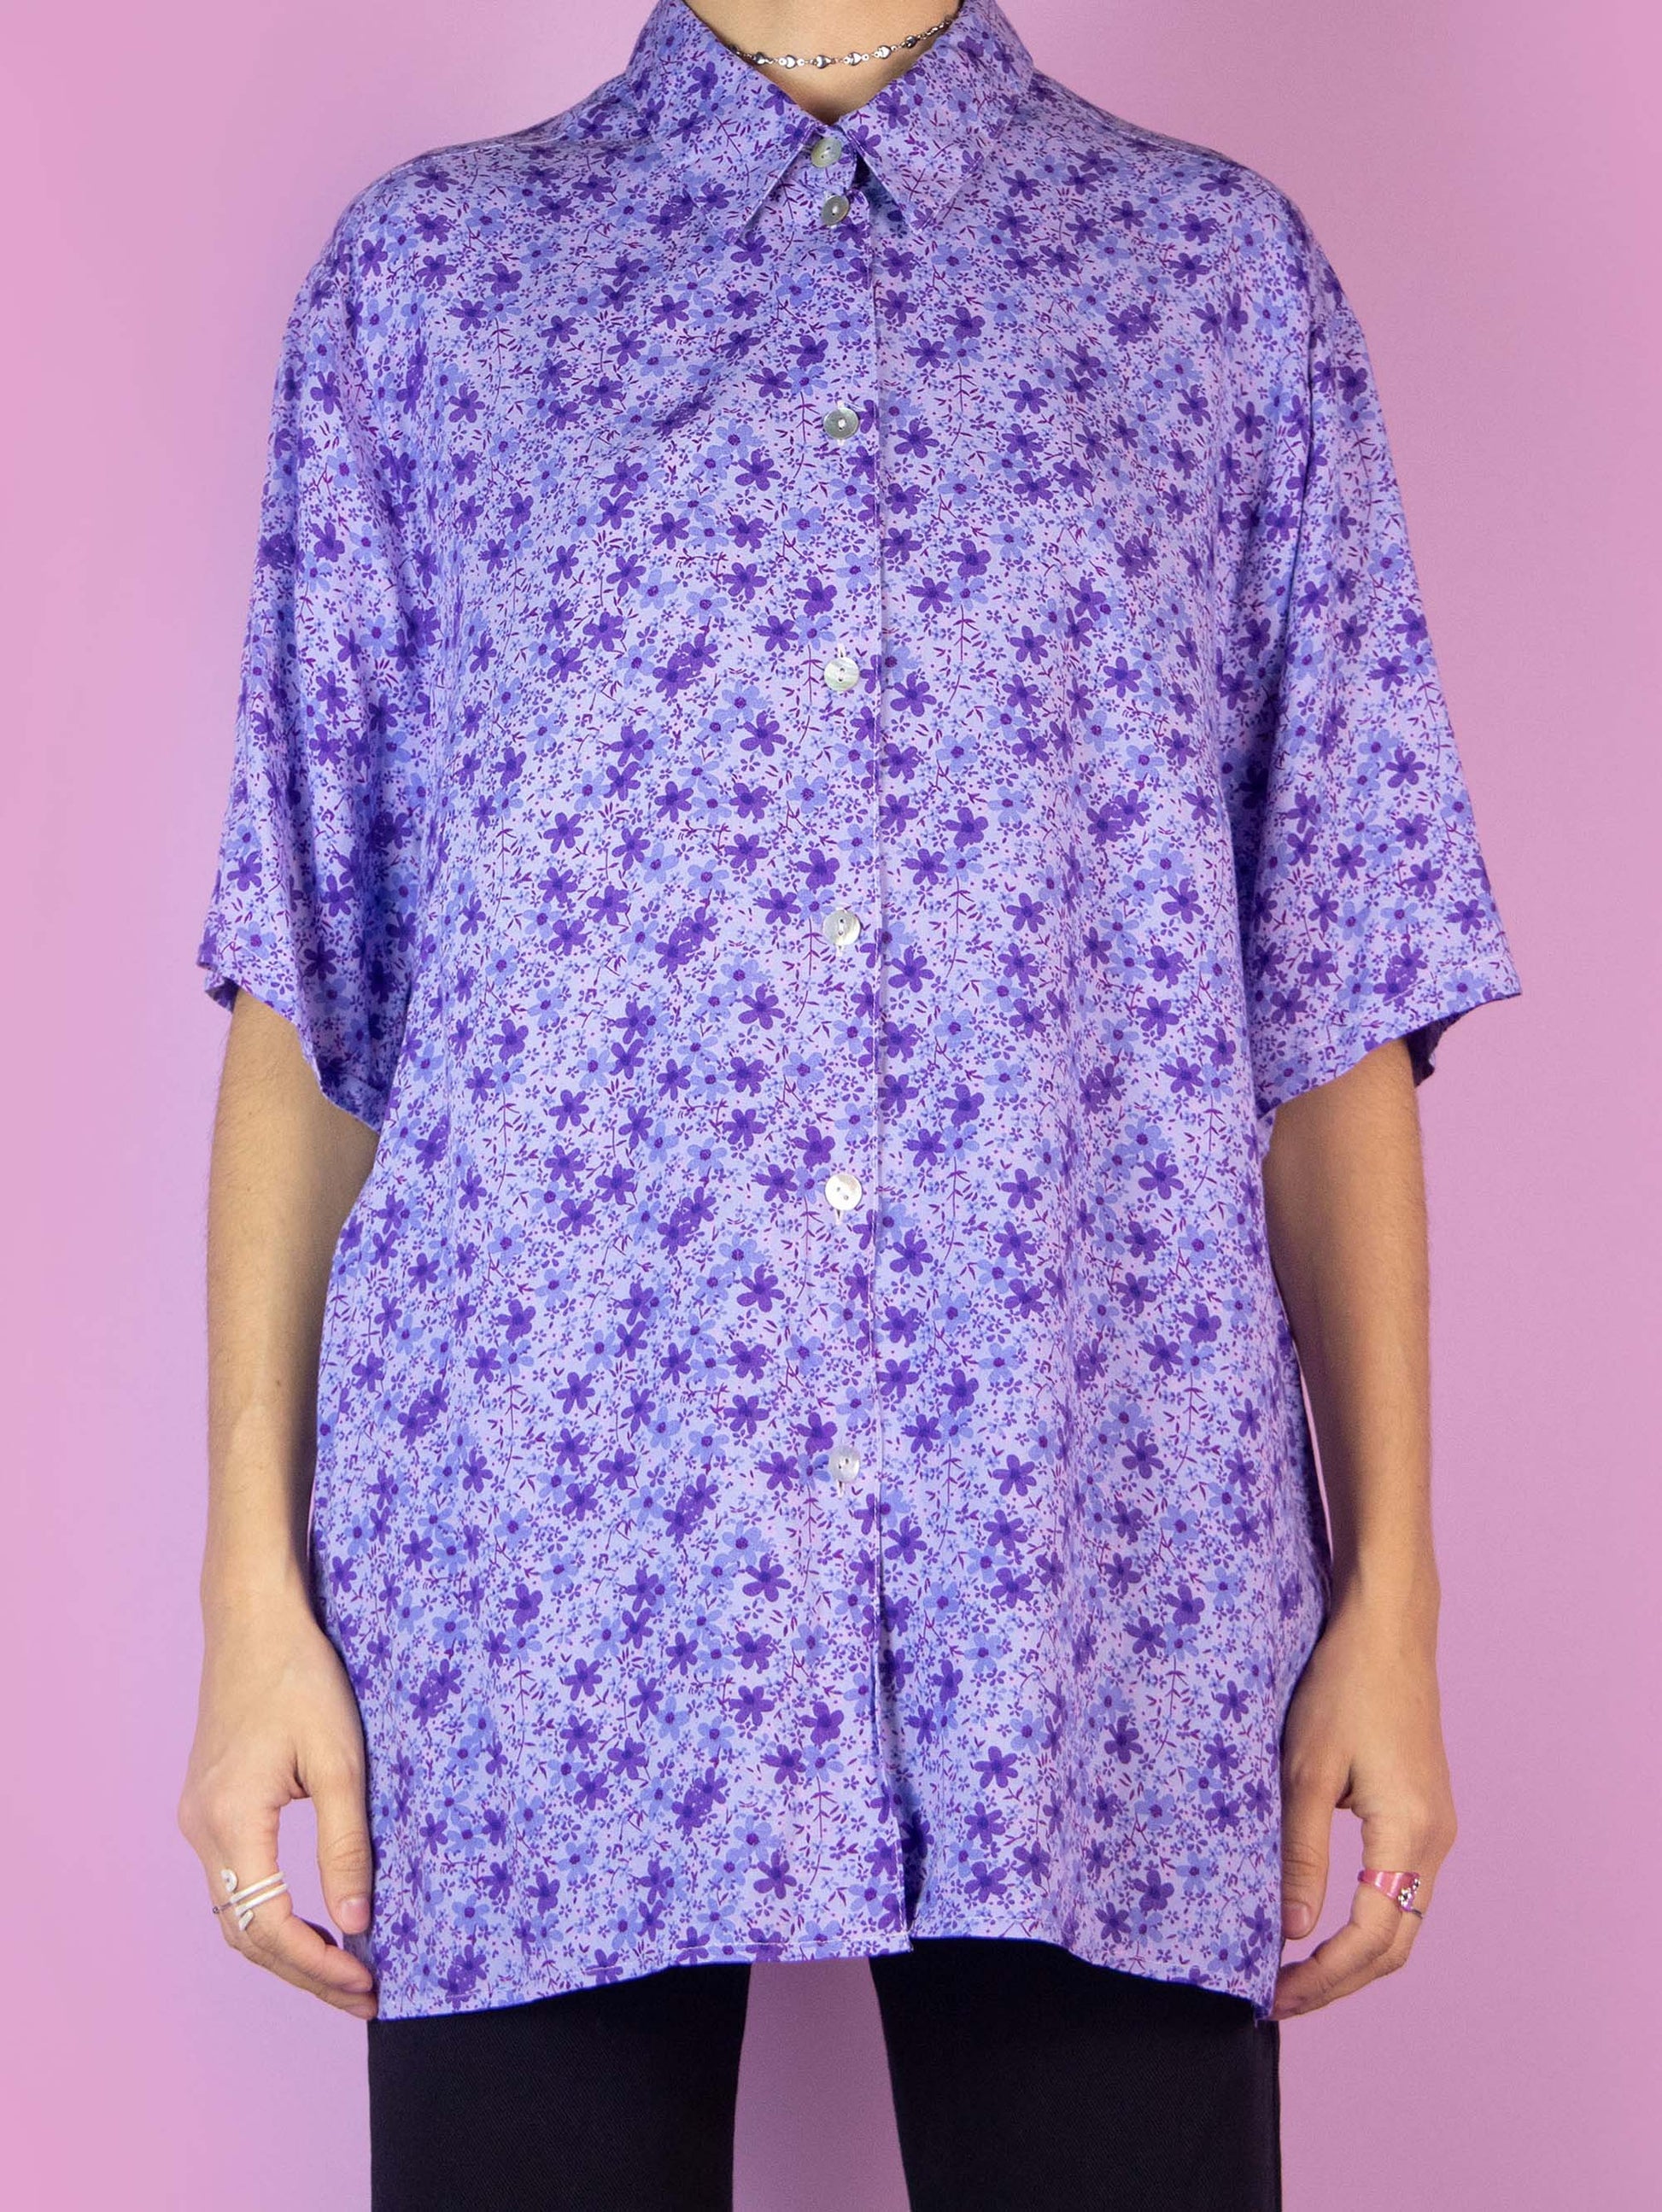 The Vintage 90s Boho Purple Floral Blouse is a short-sleeved lilac shirt with a collar and buttons. Retro grunge 1990s summer shirt.